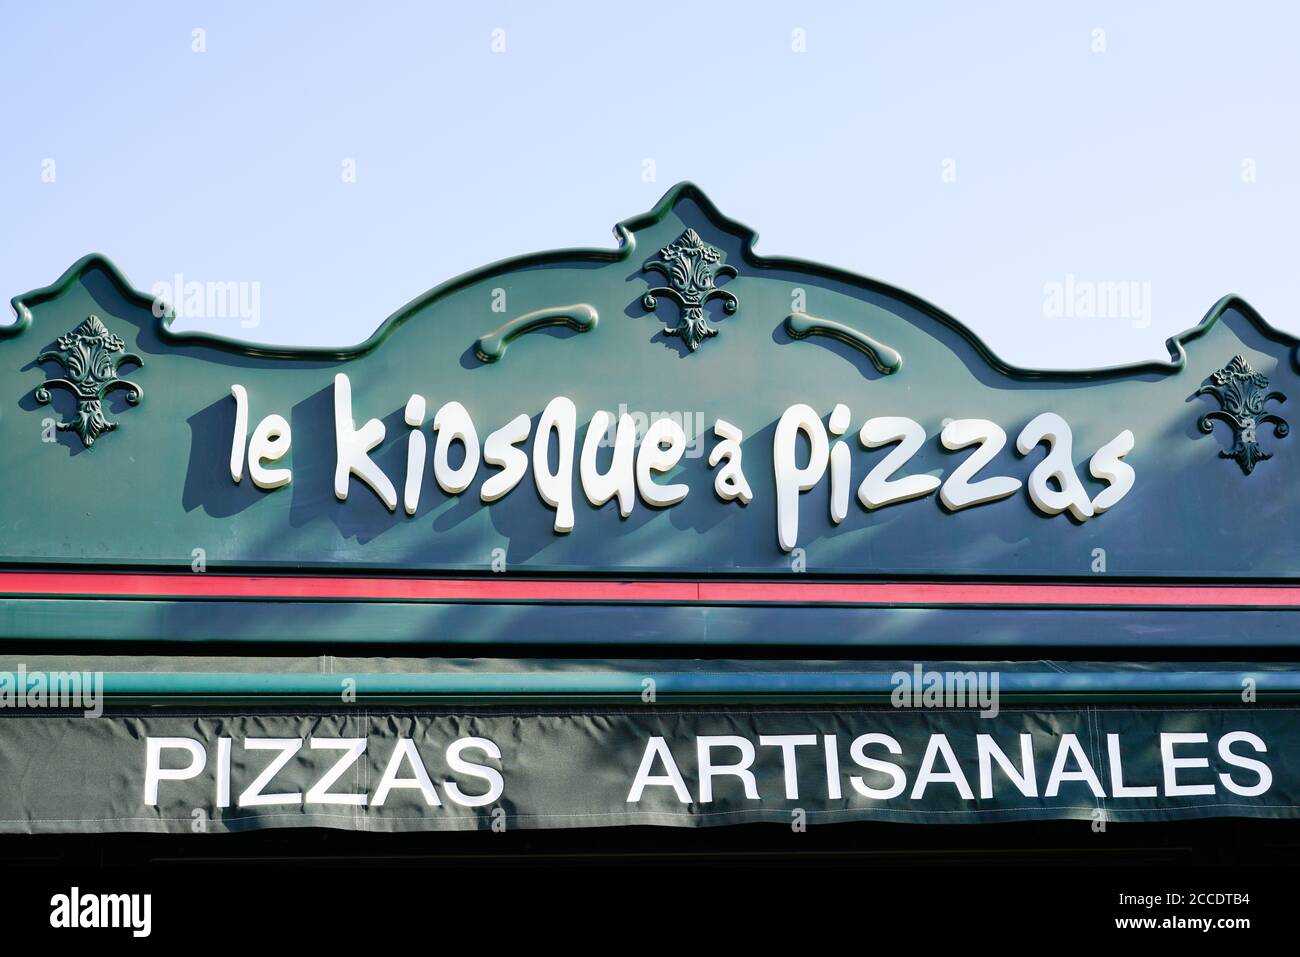 Bordeaux , Aquitaine / France - 08 16 2020 : le kiosque a pizza logo sign  front of takeaway pizza kiosk and homemade pizzas Stock Photo - Alamy